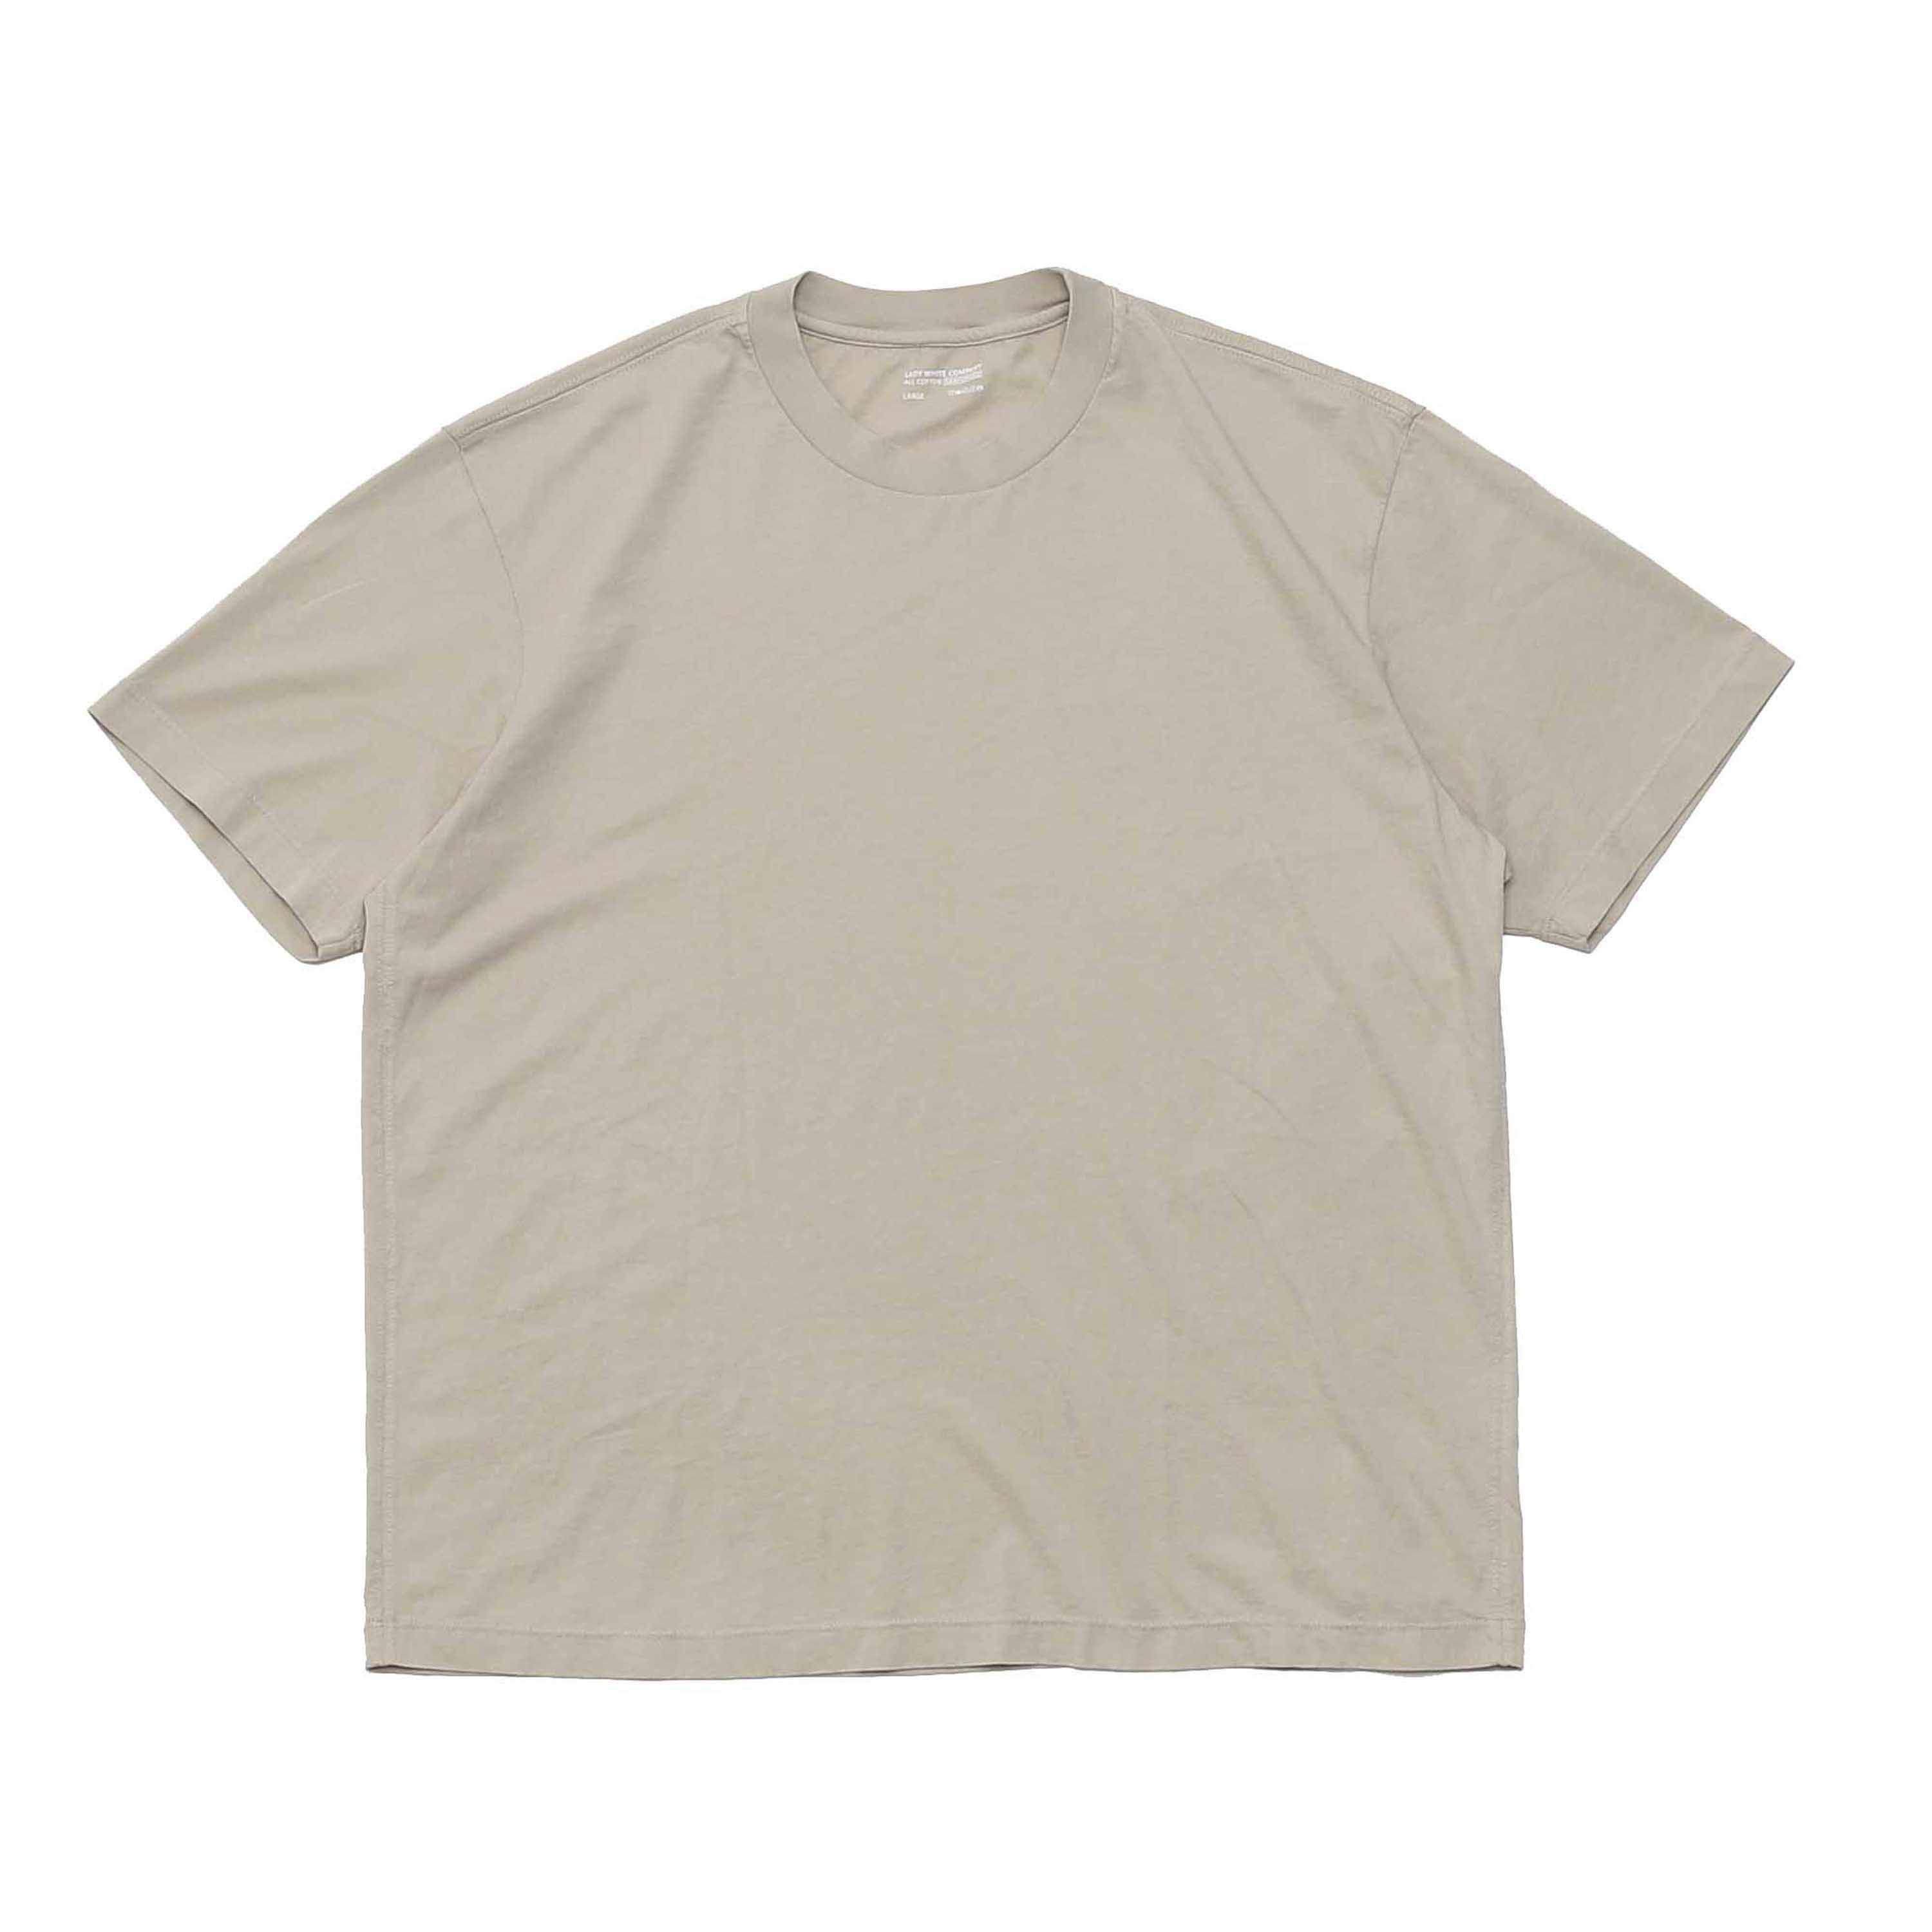 ATHENS T-SHIRT - PALE CLAY